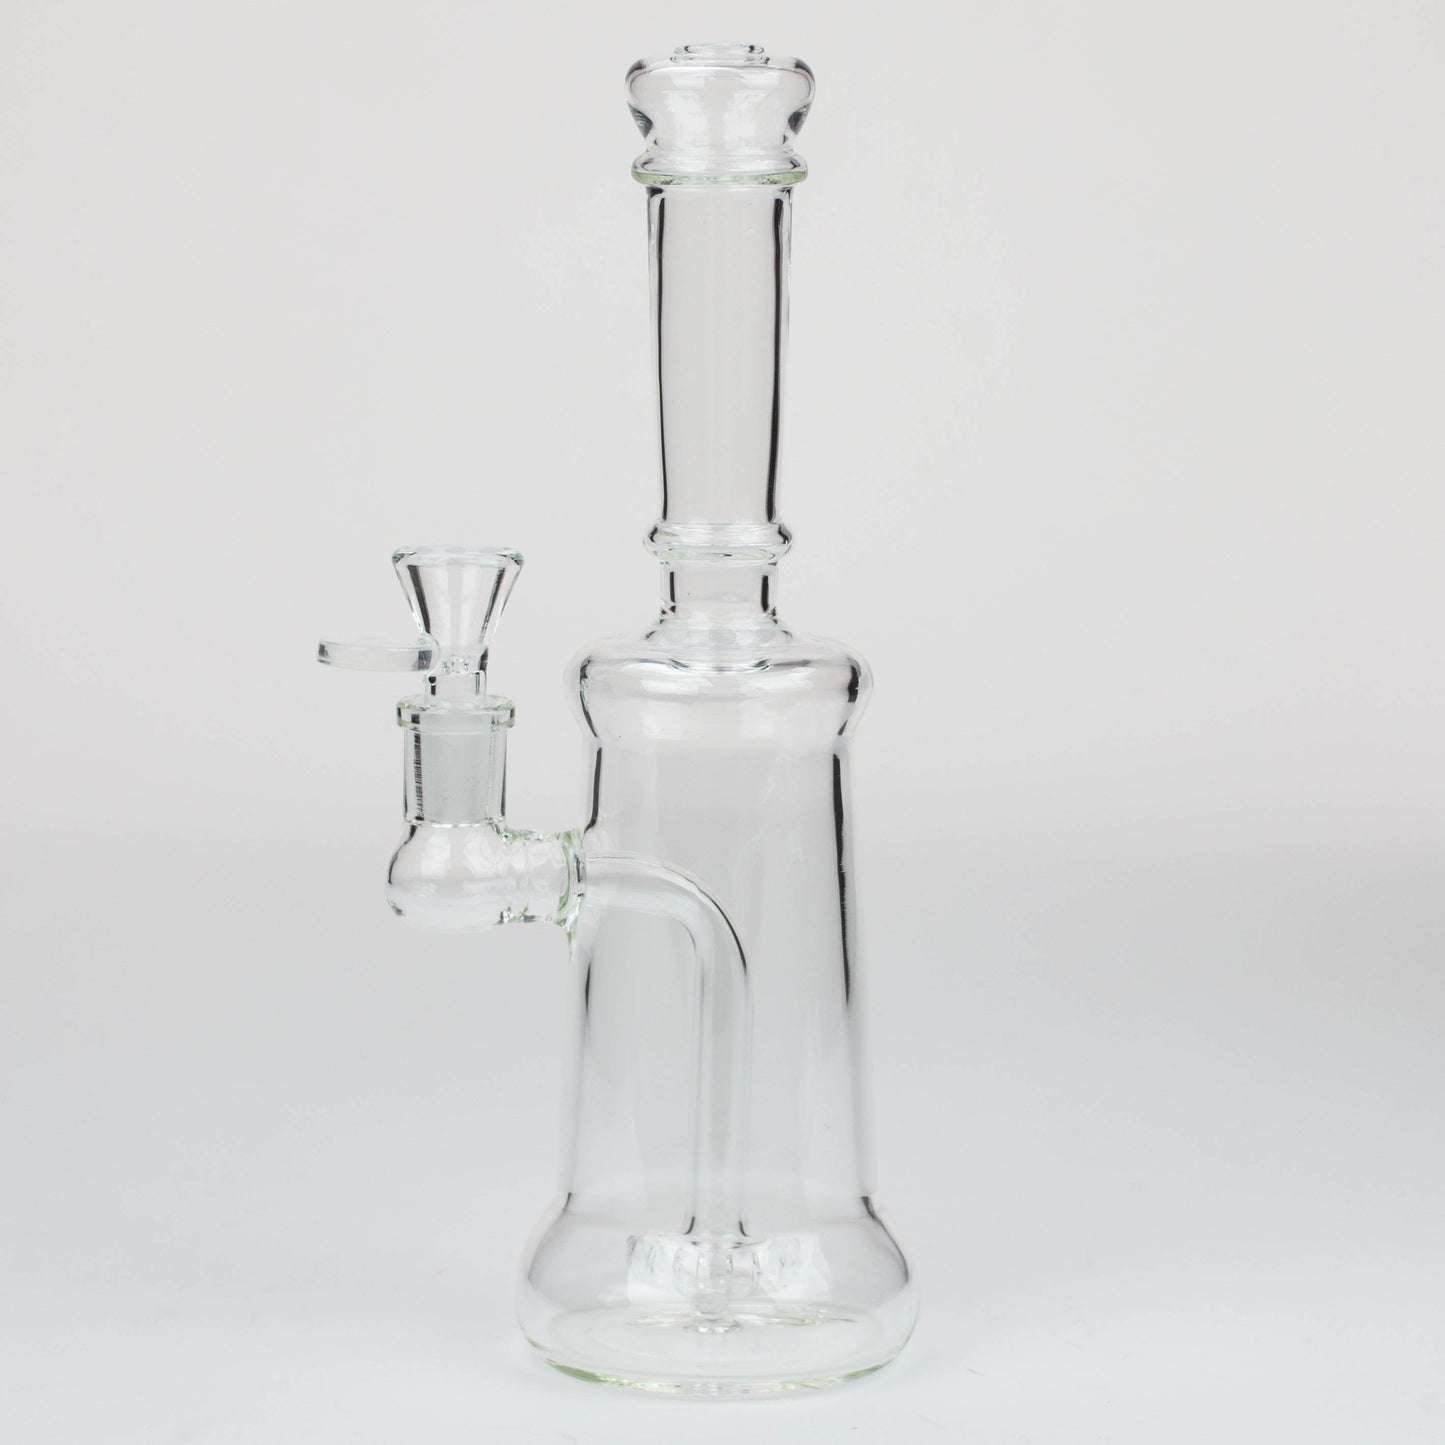 
Quality Borosilicate Glass
10" Height
Base : 4
Bowls for a 14 mm female Joint
Showerhead diffuser
Stemless
10" showerhead diffuser glass bong [SP54]Bongsempire420